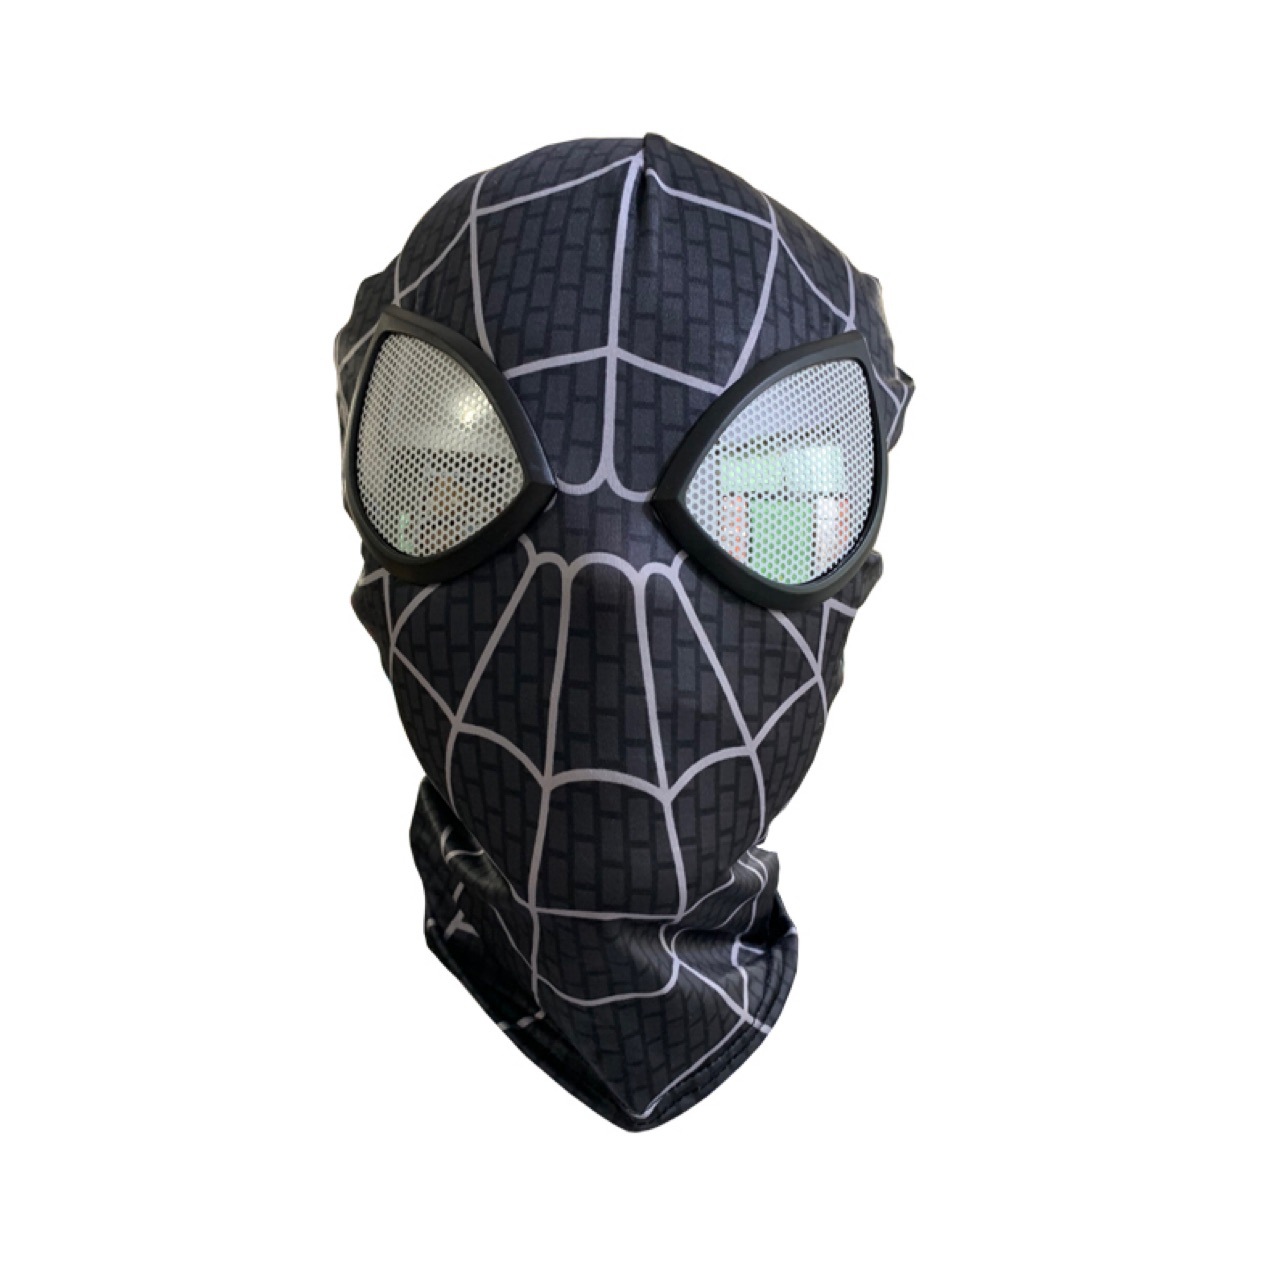 Douyin Normal Heart Same Headgear Amazing Spider-Man Headgear Funny Cosplay Mask for Adults and Children